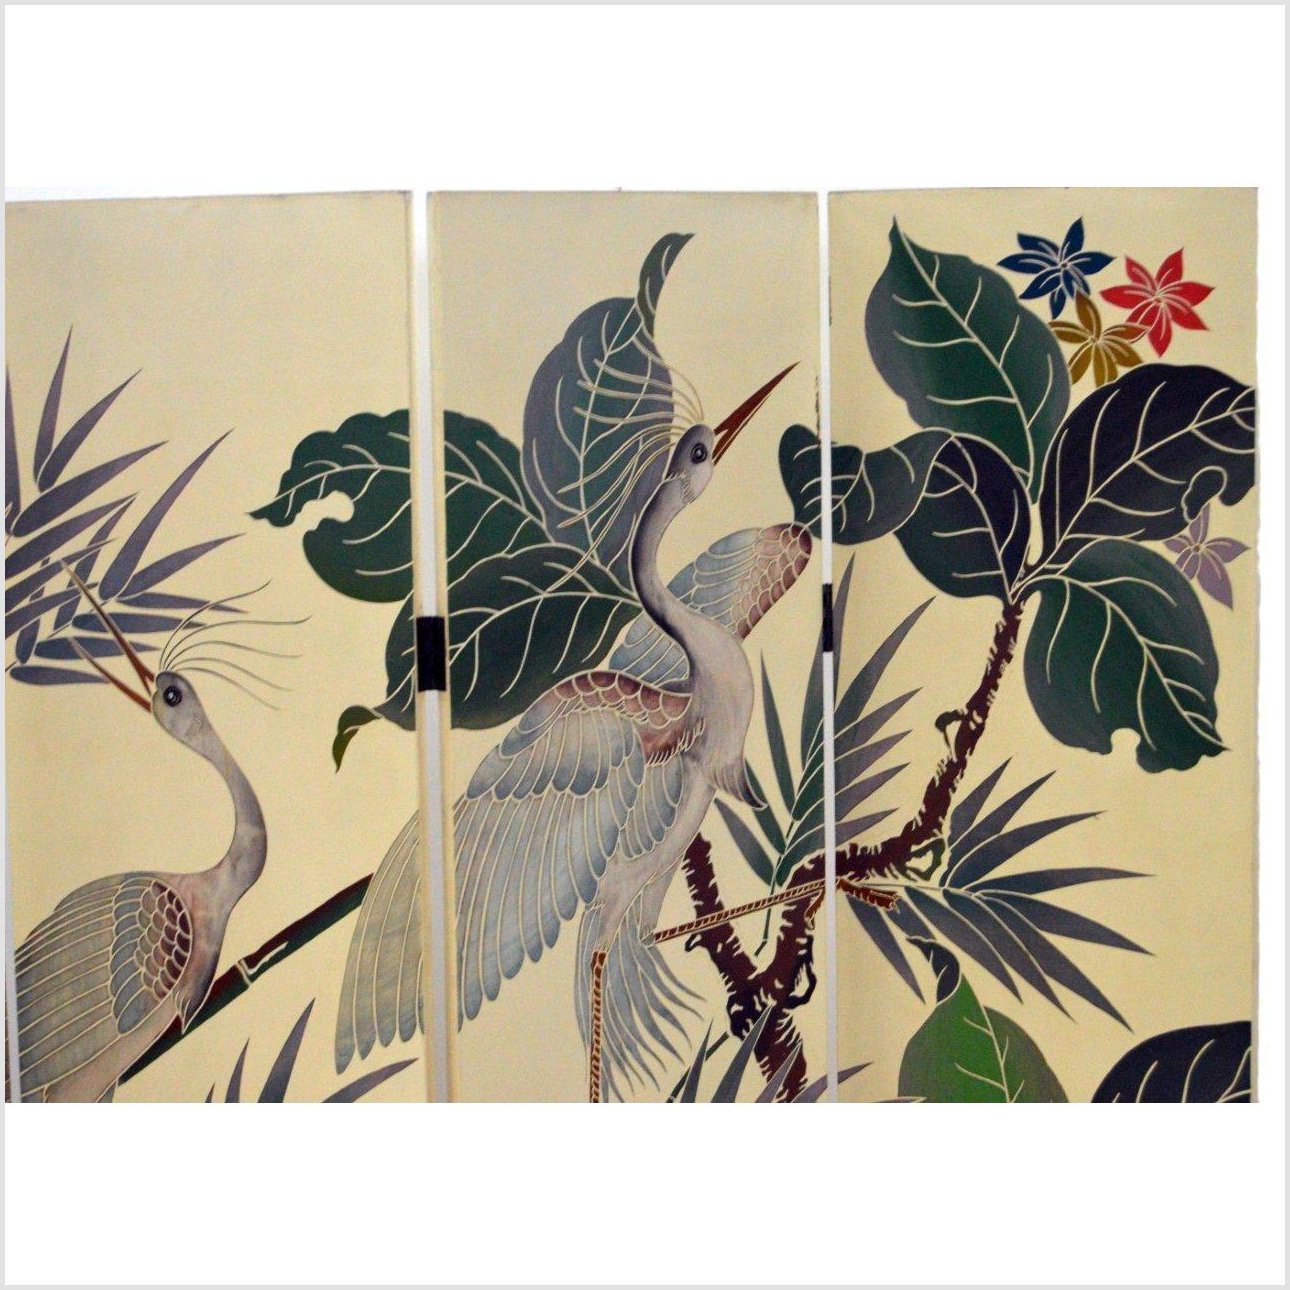 4-Panel Screen Designed with Cranes and Tropical Plants-YN2850-9. Asian & Chinese Furniture, Art, Antiques, Vintage Home Décor for sale at FEA Home